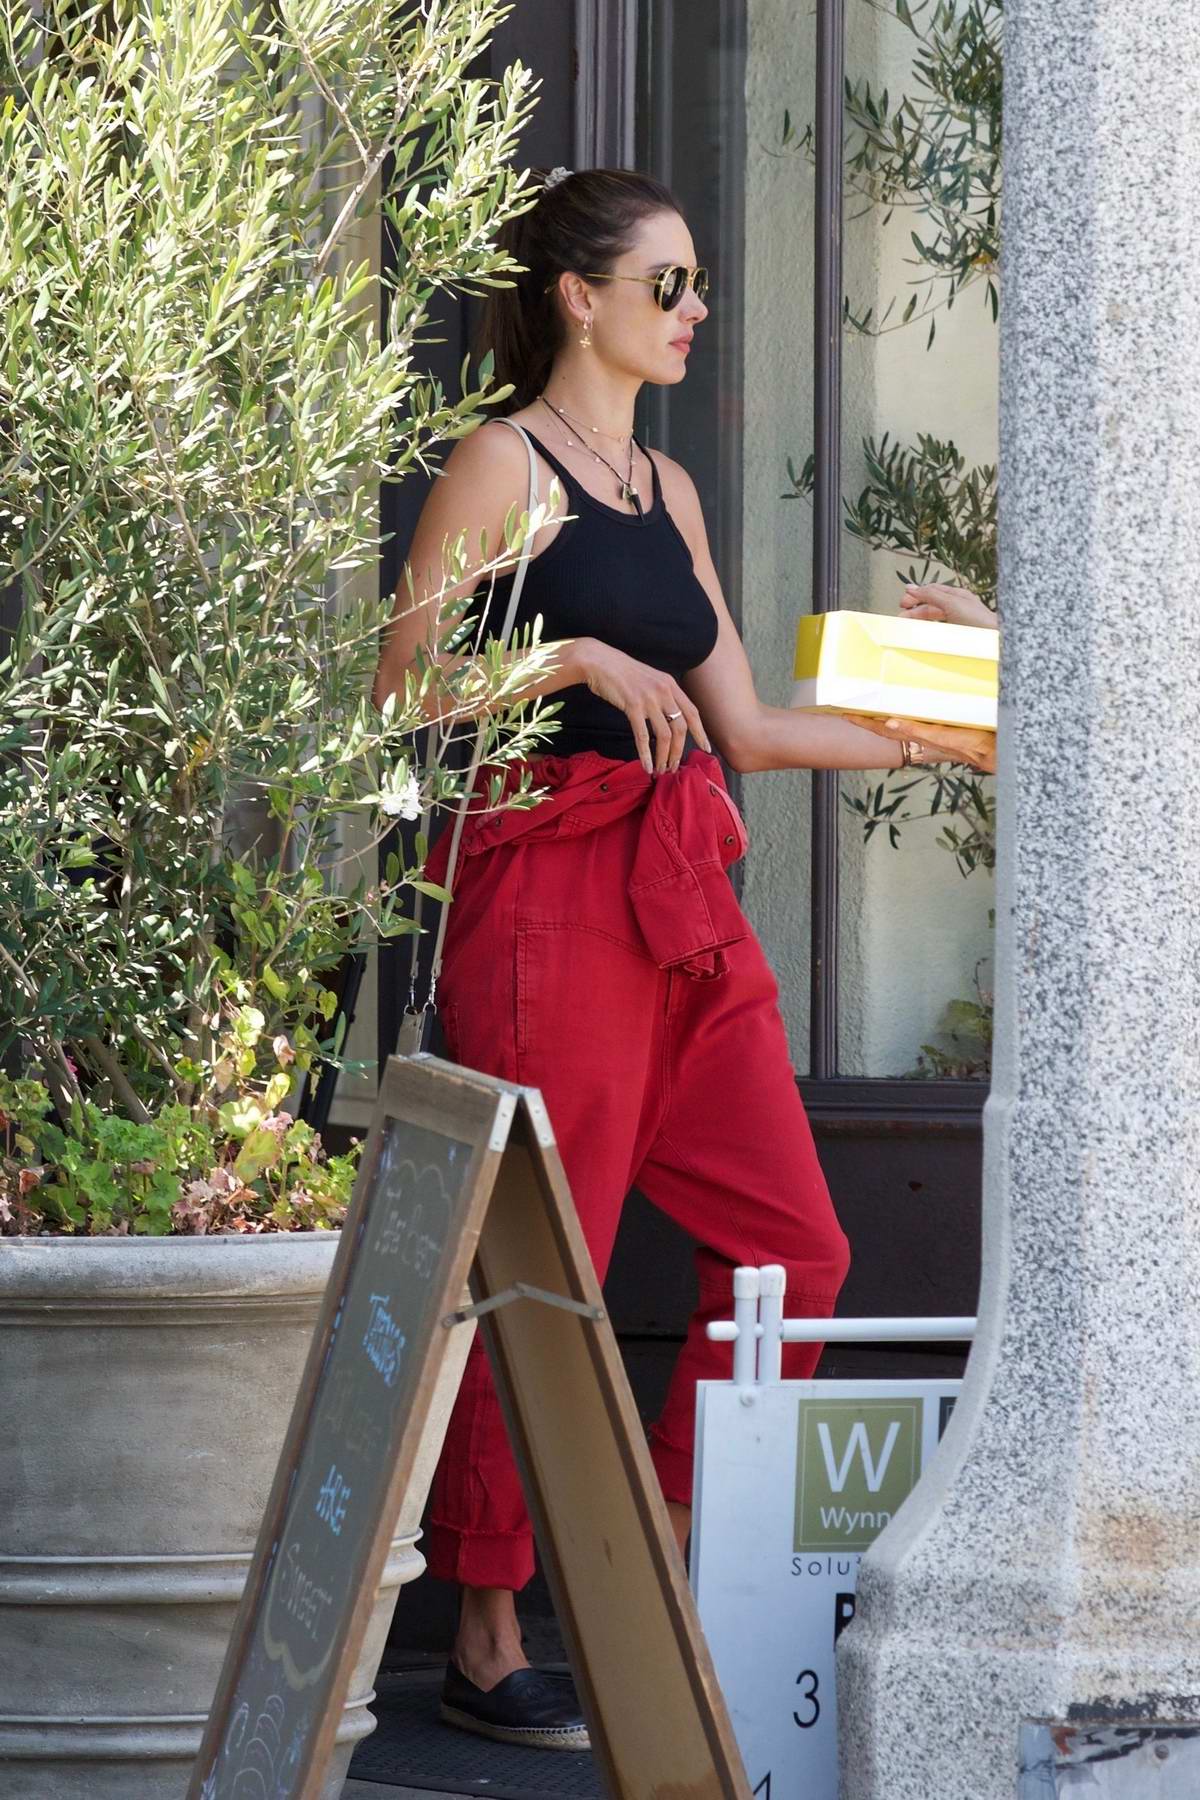 alessandra ambrosio rocks a black tank top and red denim while